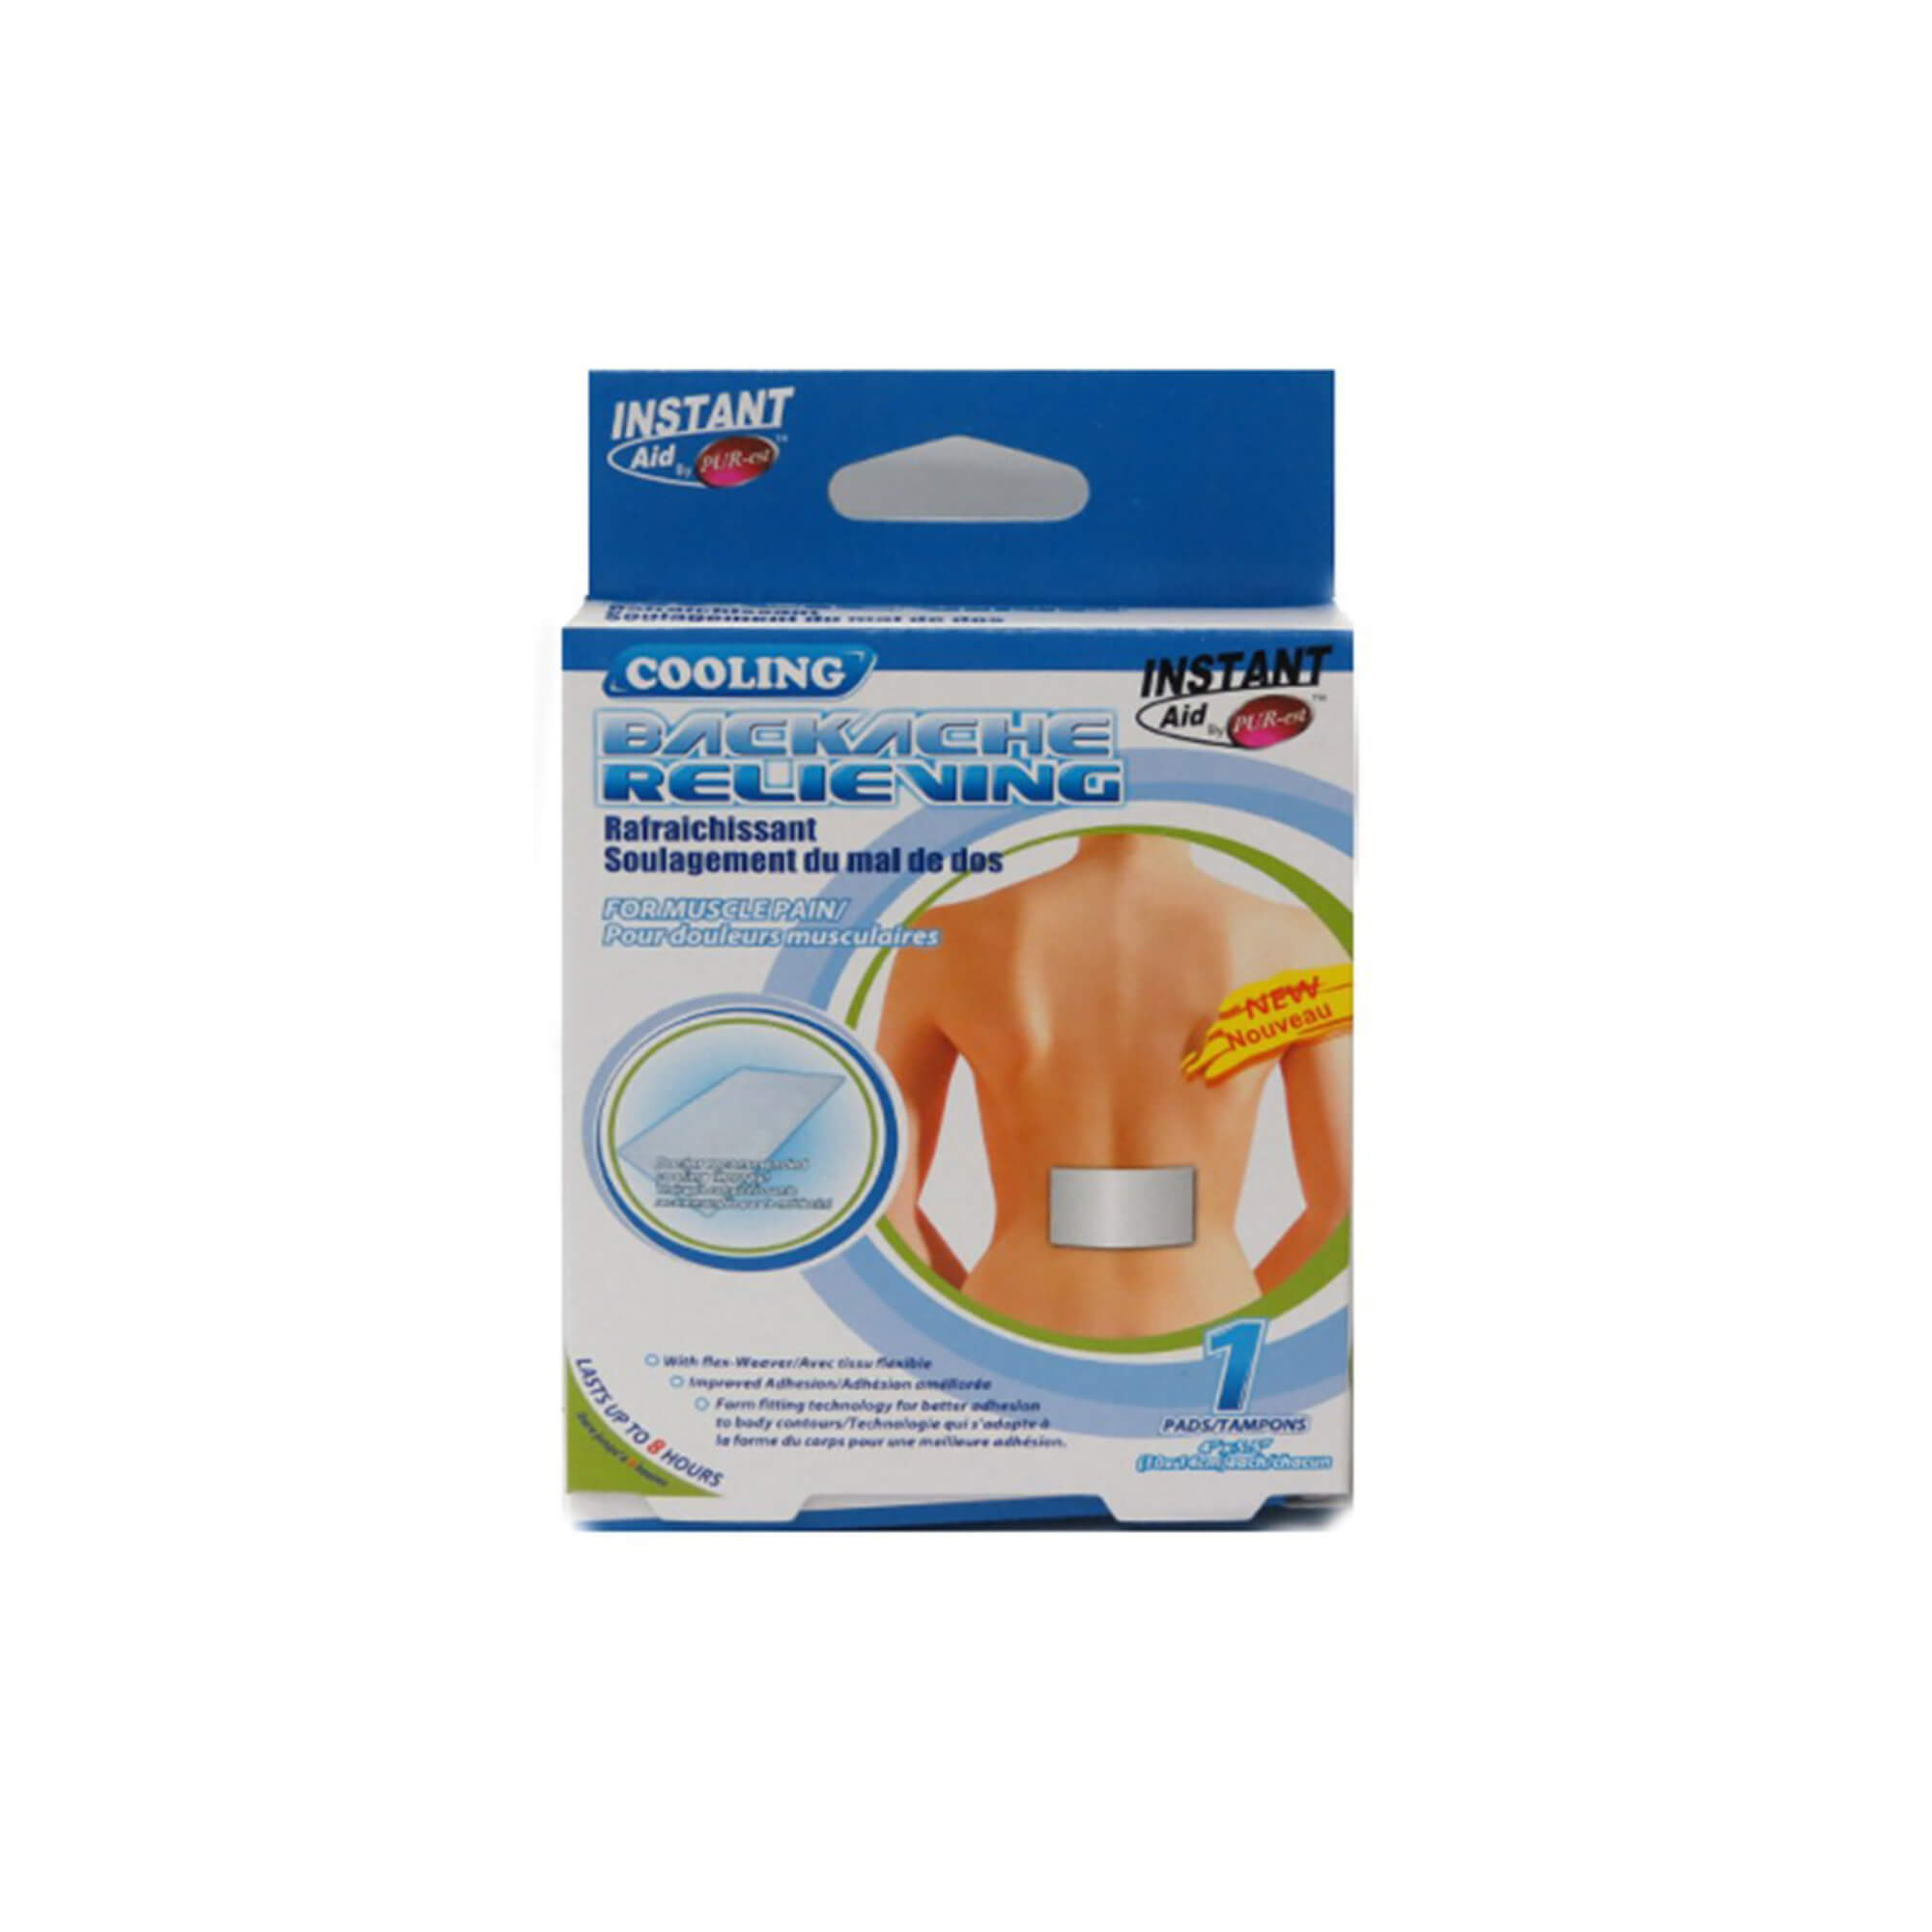 Purest Instant Aid- Cooling Backache Relieving Patch